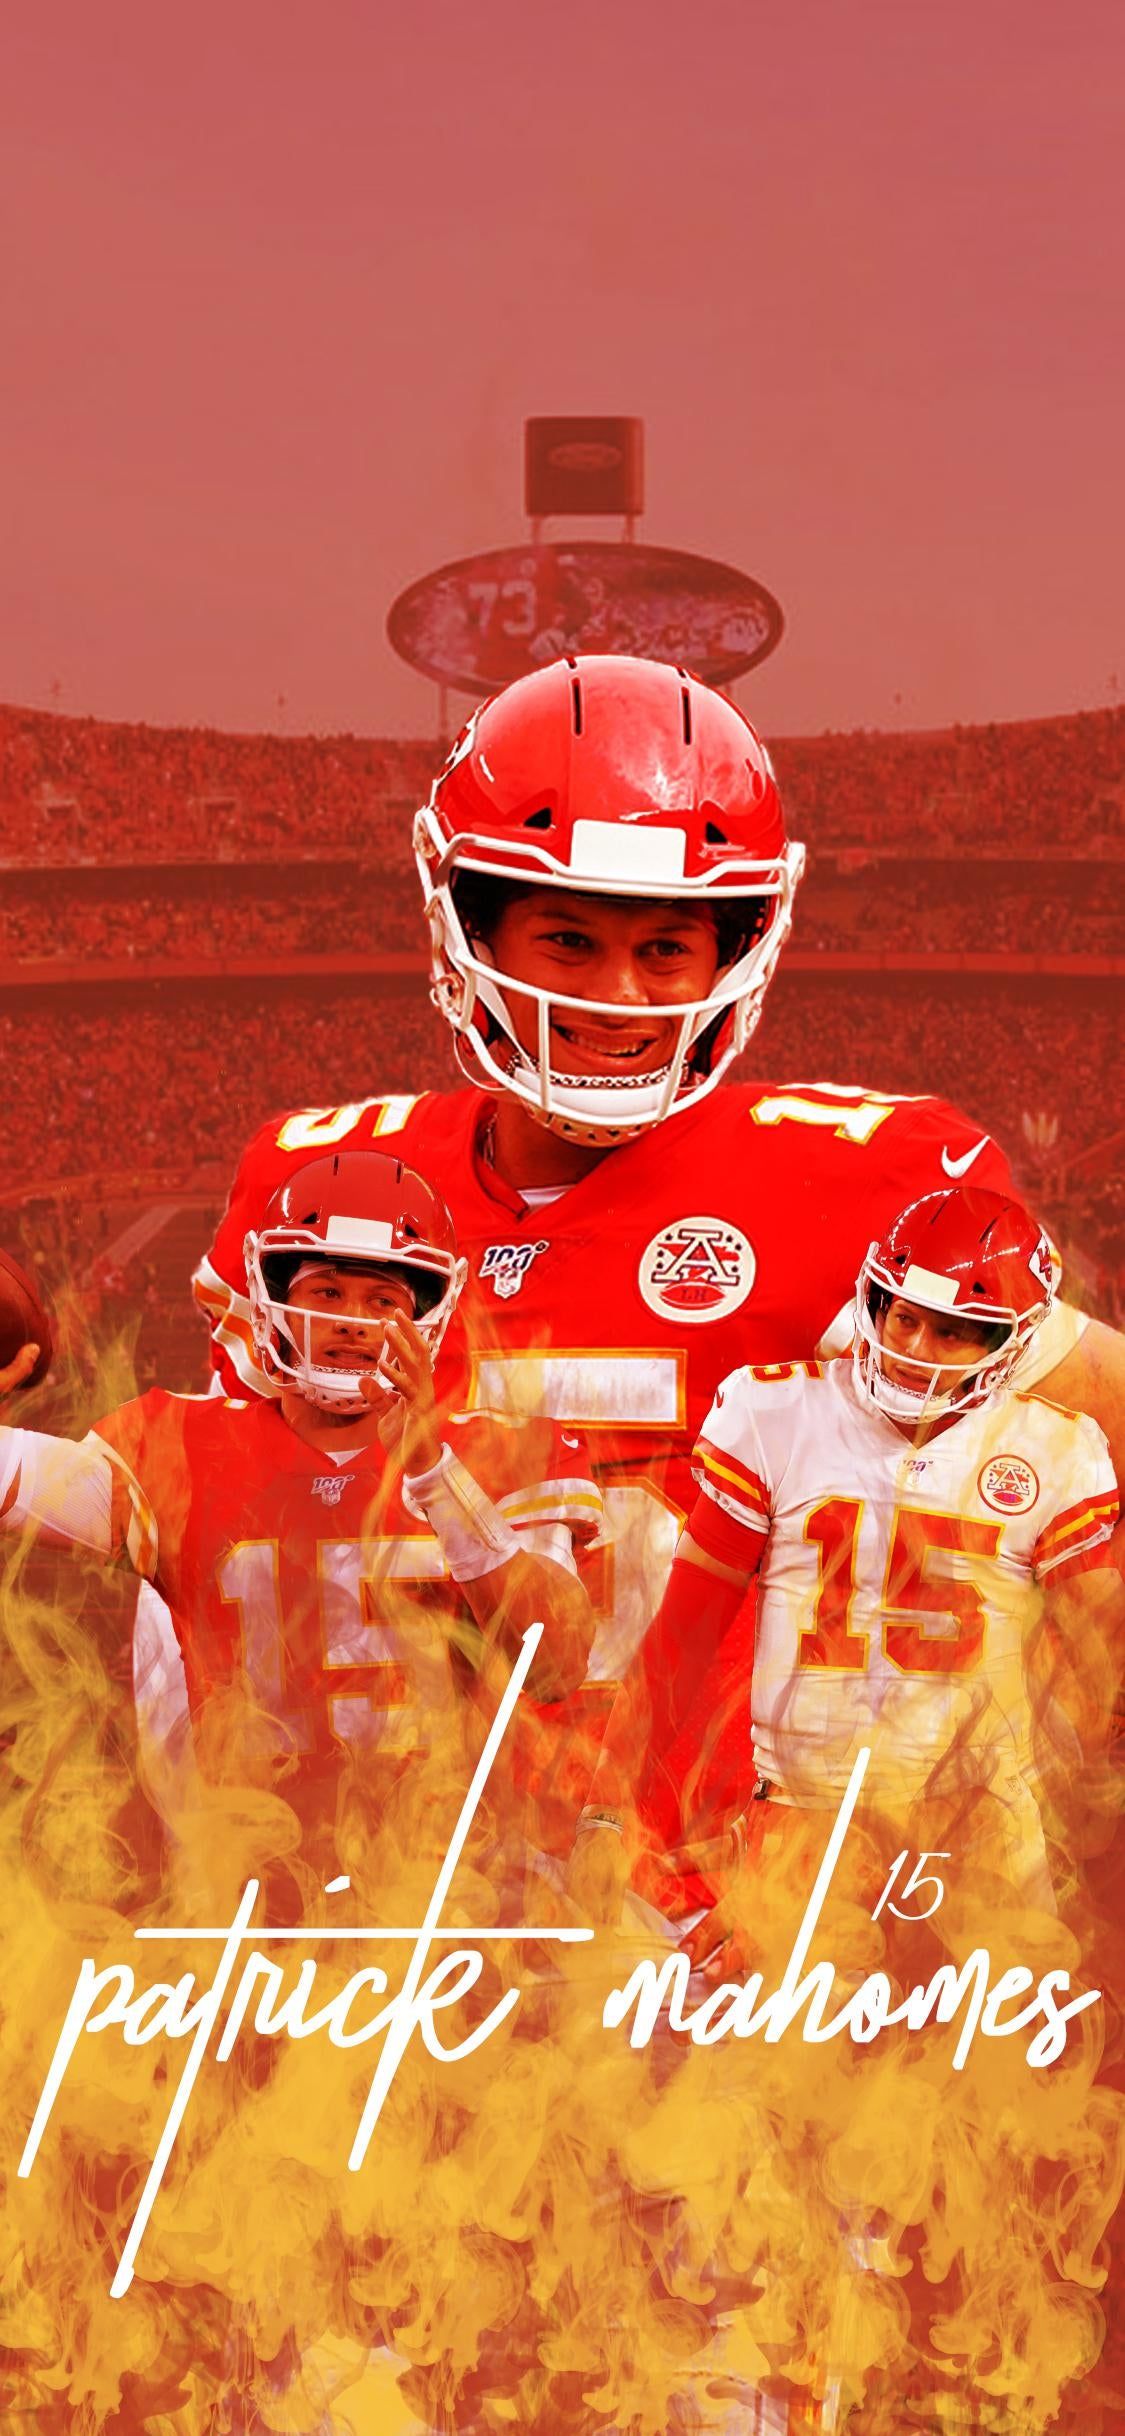 Hey R KansasCityChiefs, I've Been Dabbling In Photohop Trying To Gain Some More Experience With It. I Have Been Creating Some New Wallpaper And Just Finished This One Of Mahomes. Hope You Guys